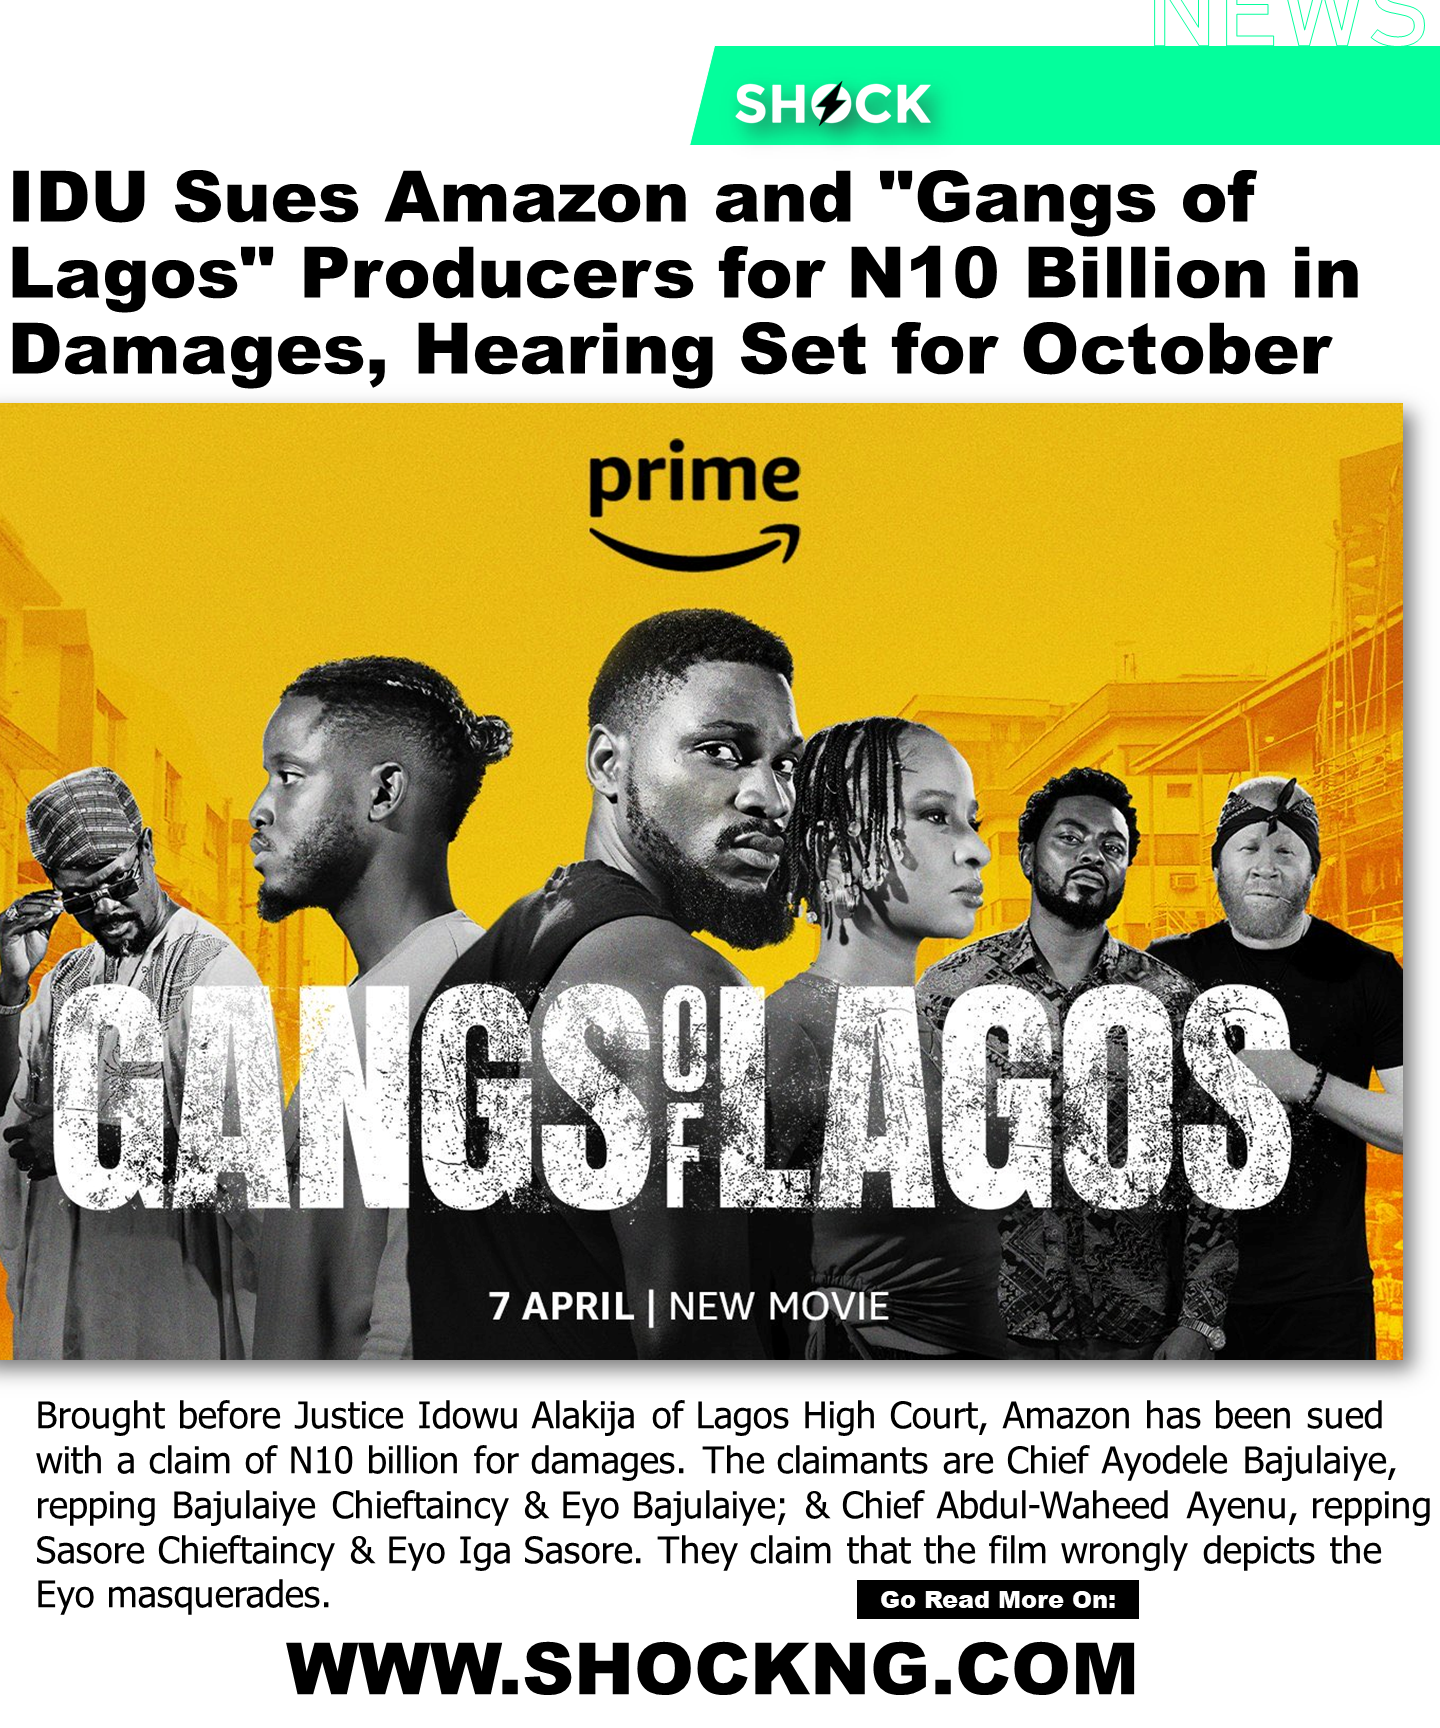 Gangs of lagos v IDU Court case 1 - IDU Sues Amazon and "Gangs of Lagos" Producers for N10 Billion, Hearing Set for October